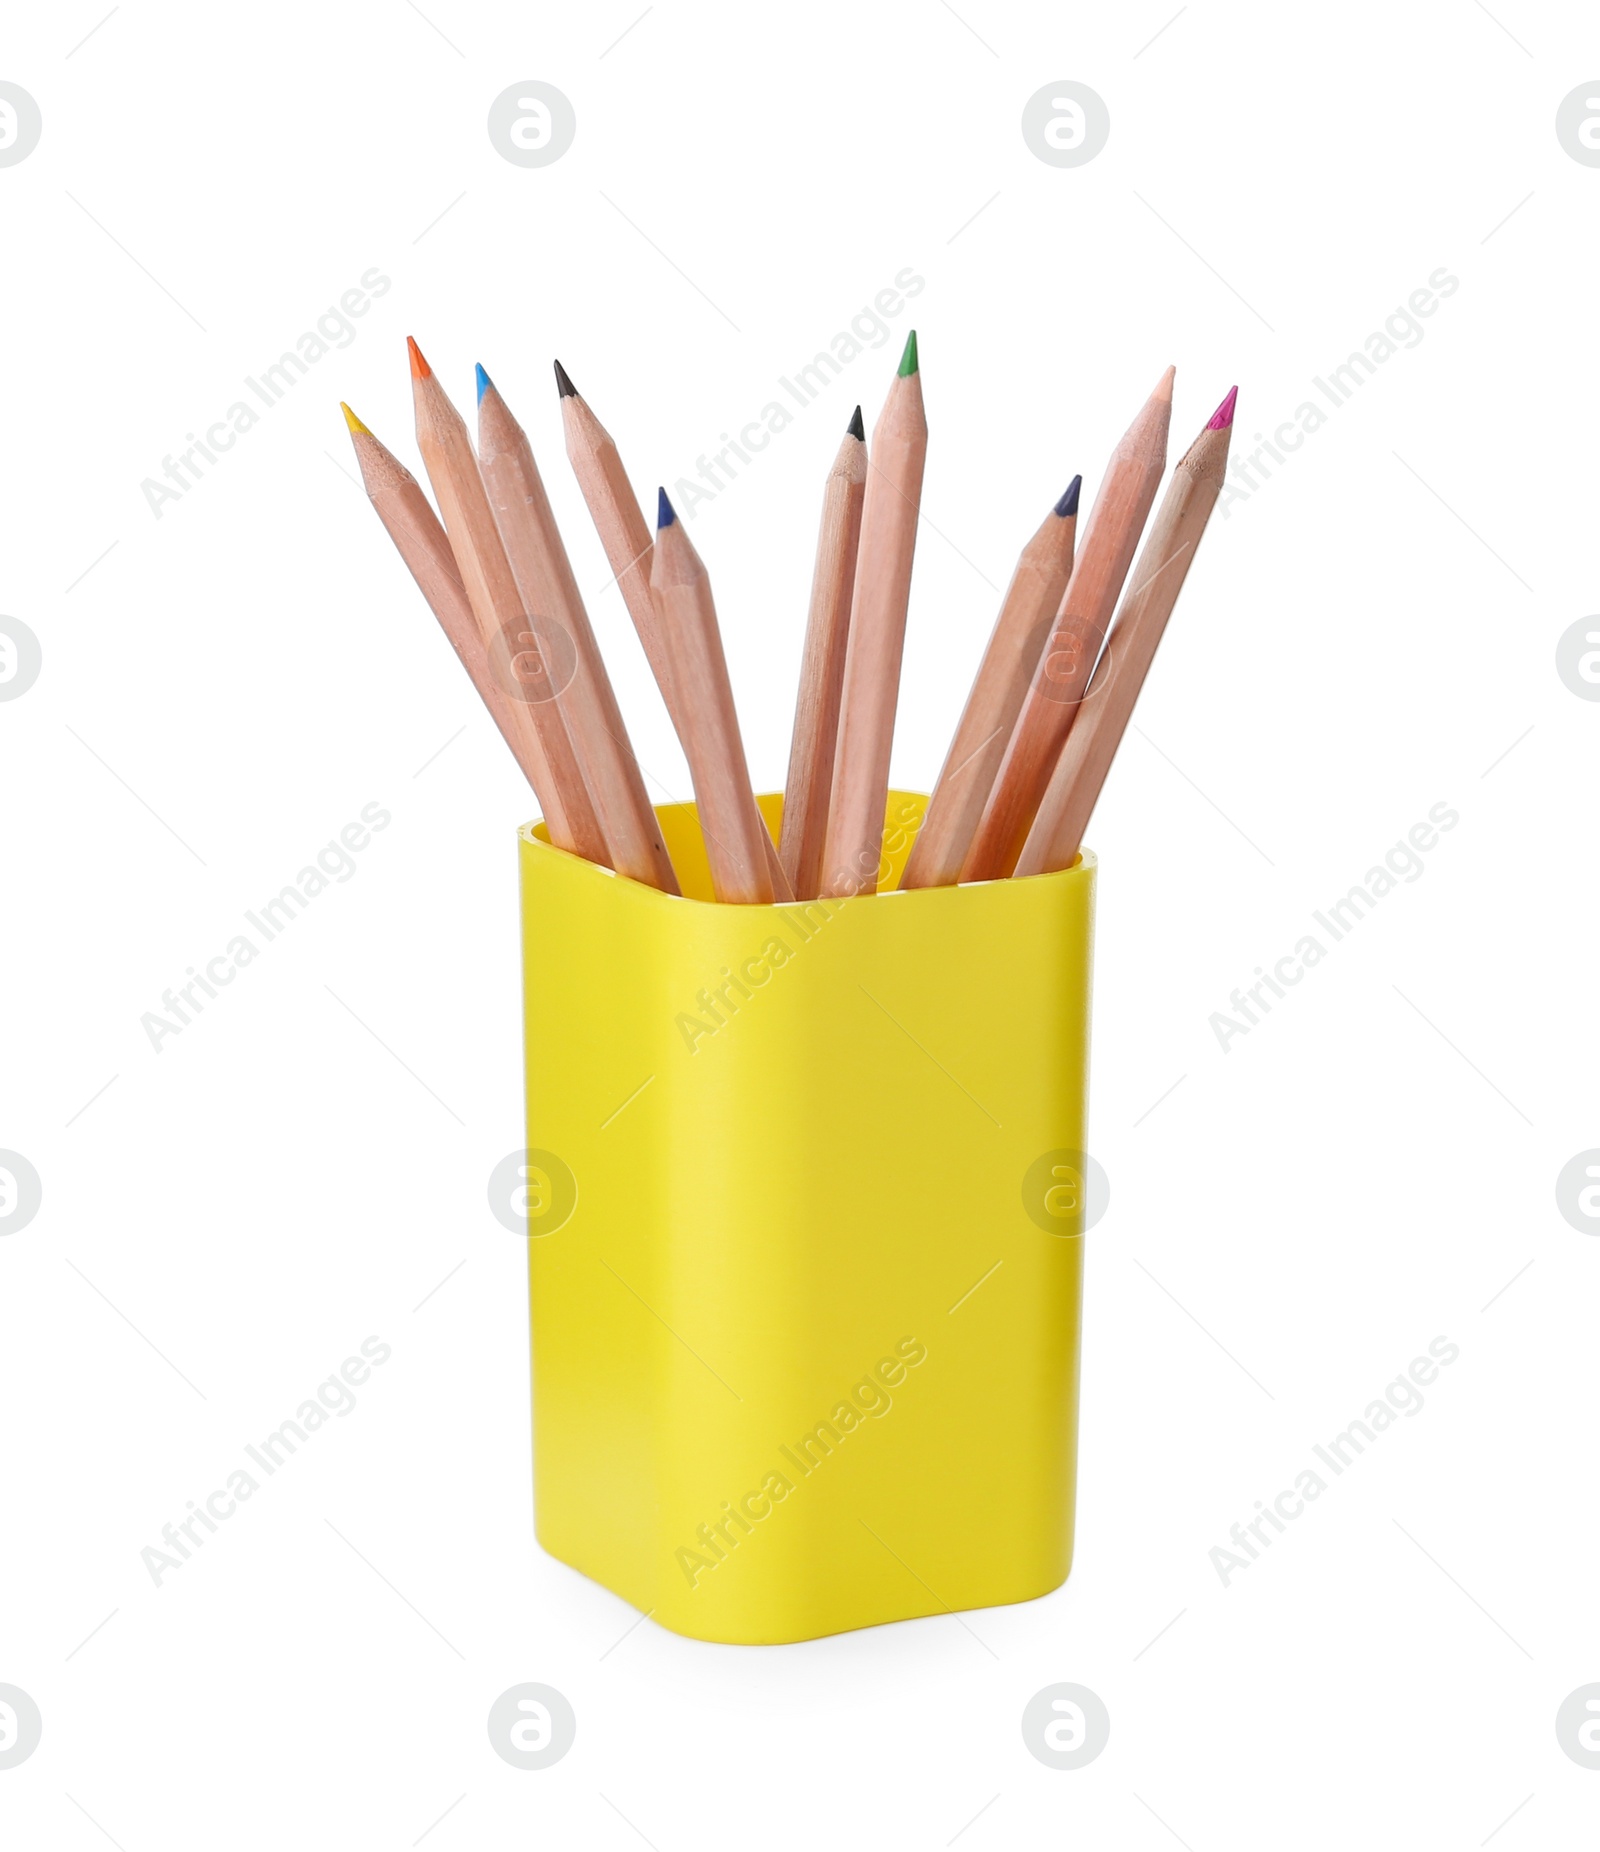 Photo of Many colorful pencils in holder isolated on white